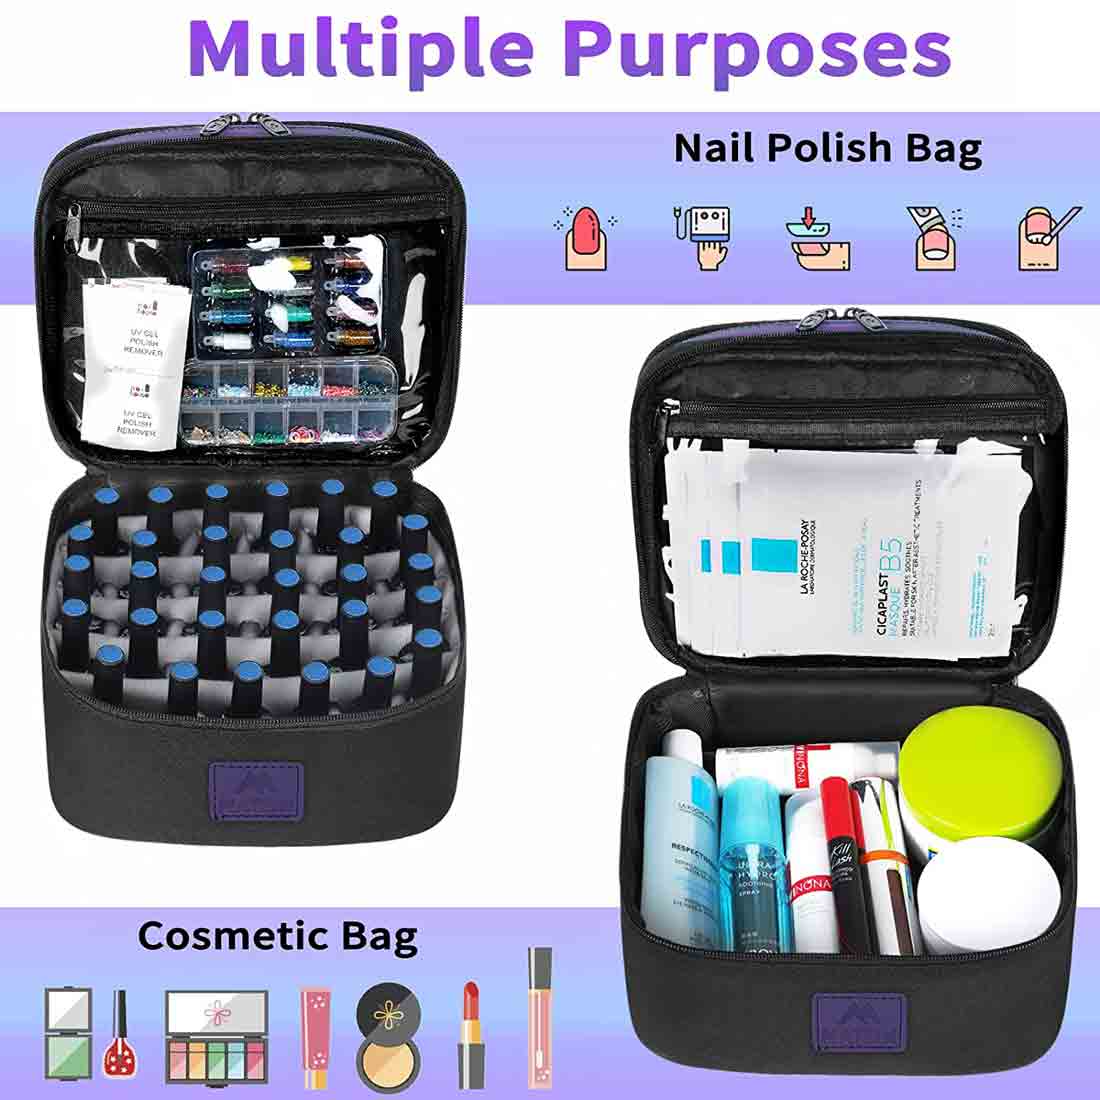 Lieonvis Nail Polish Organizer Case,Portable Double-Layer Nail Polish Organizer with Compartments,Travel Nail Polish Carrying Case for Manicure Tools